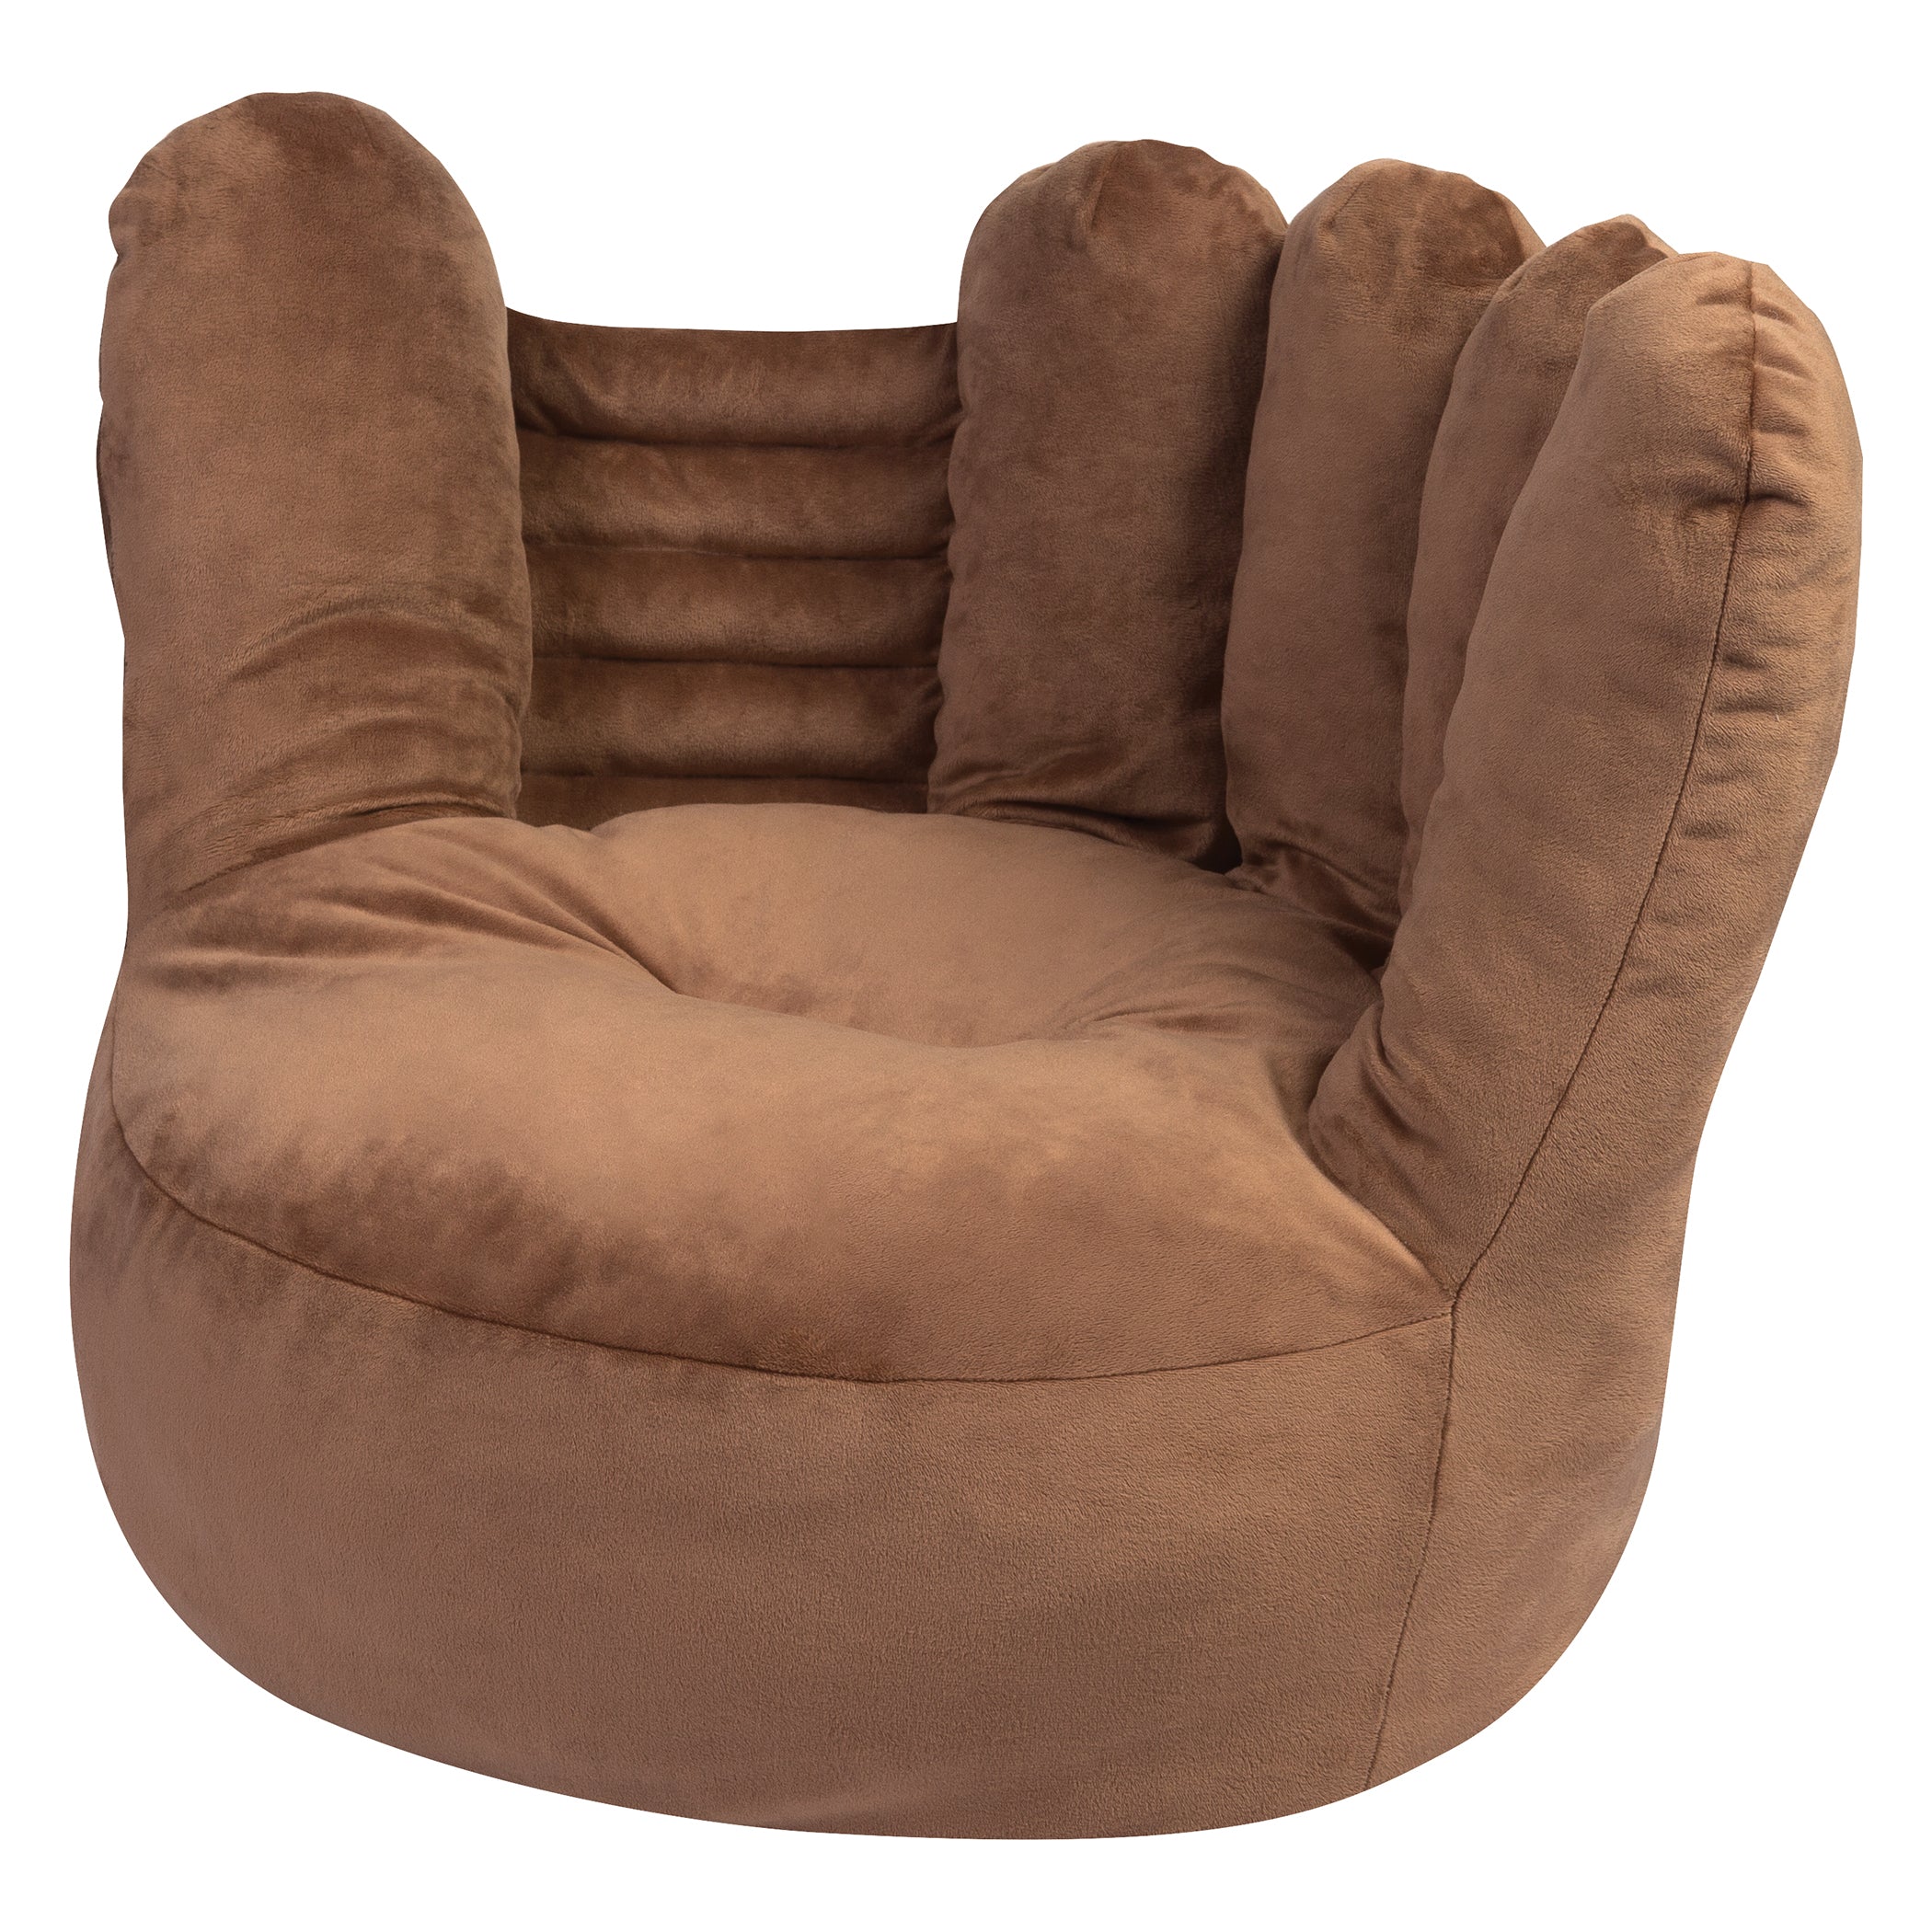 Plush Baseball Glove Toddler Chair - Simply Unique Baby Gifts